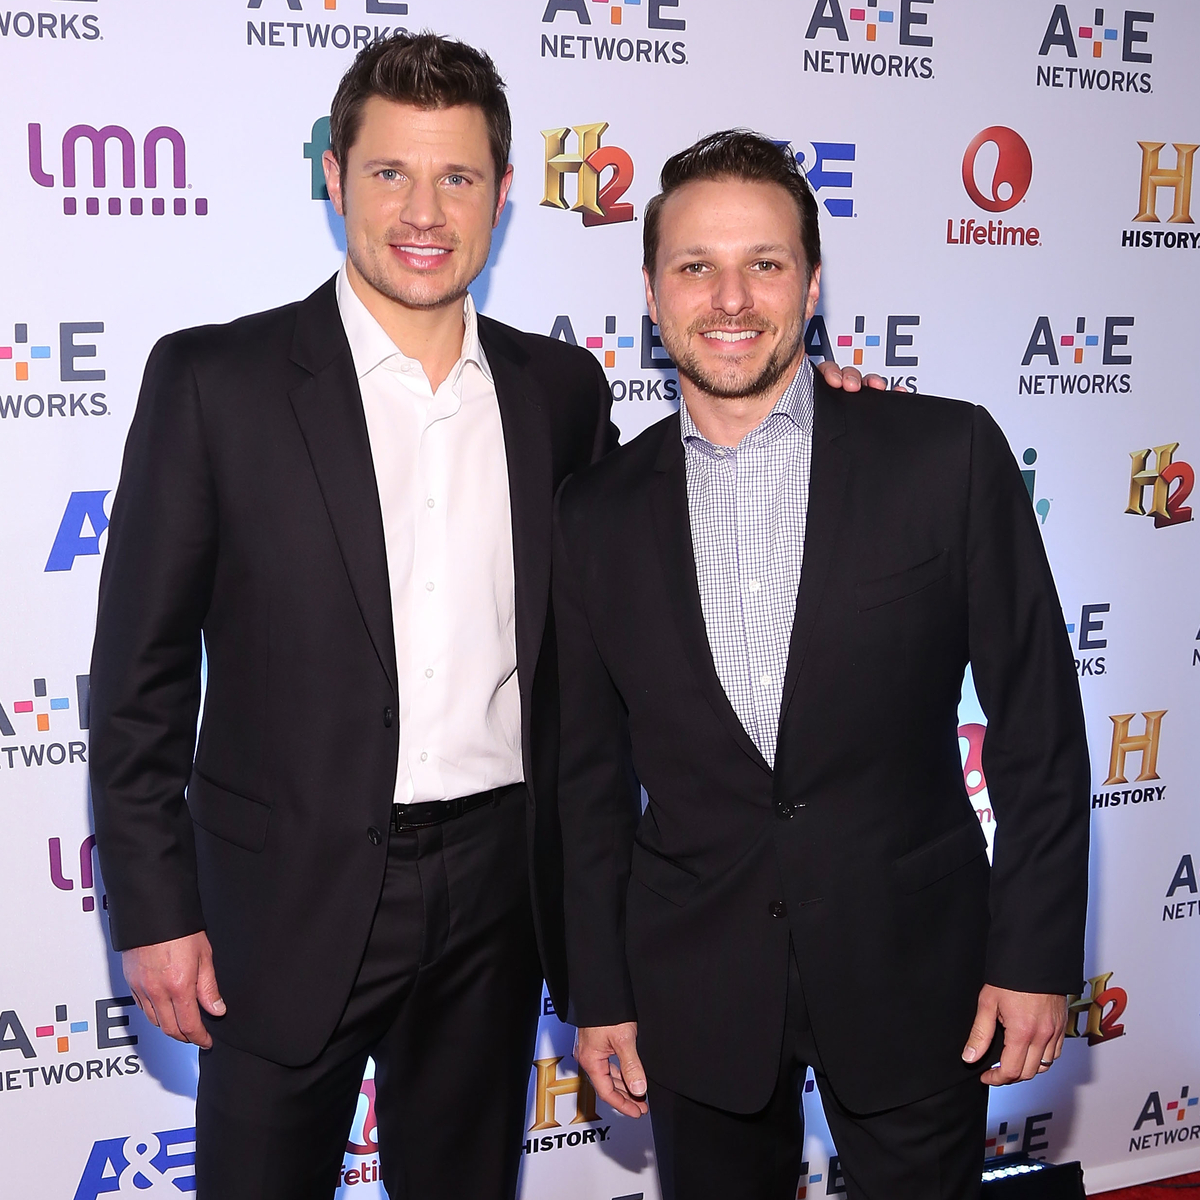 Drew Lachey Weighs In On Brother Nick Lachey's Love Is Blind Hosting Gig